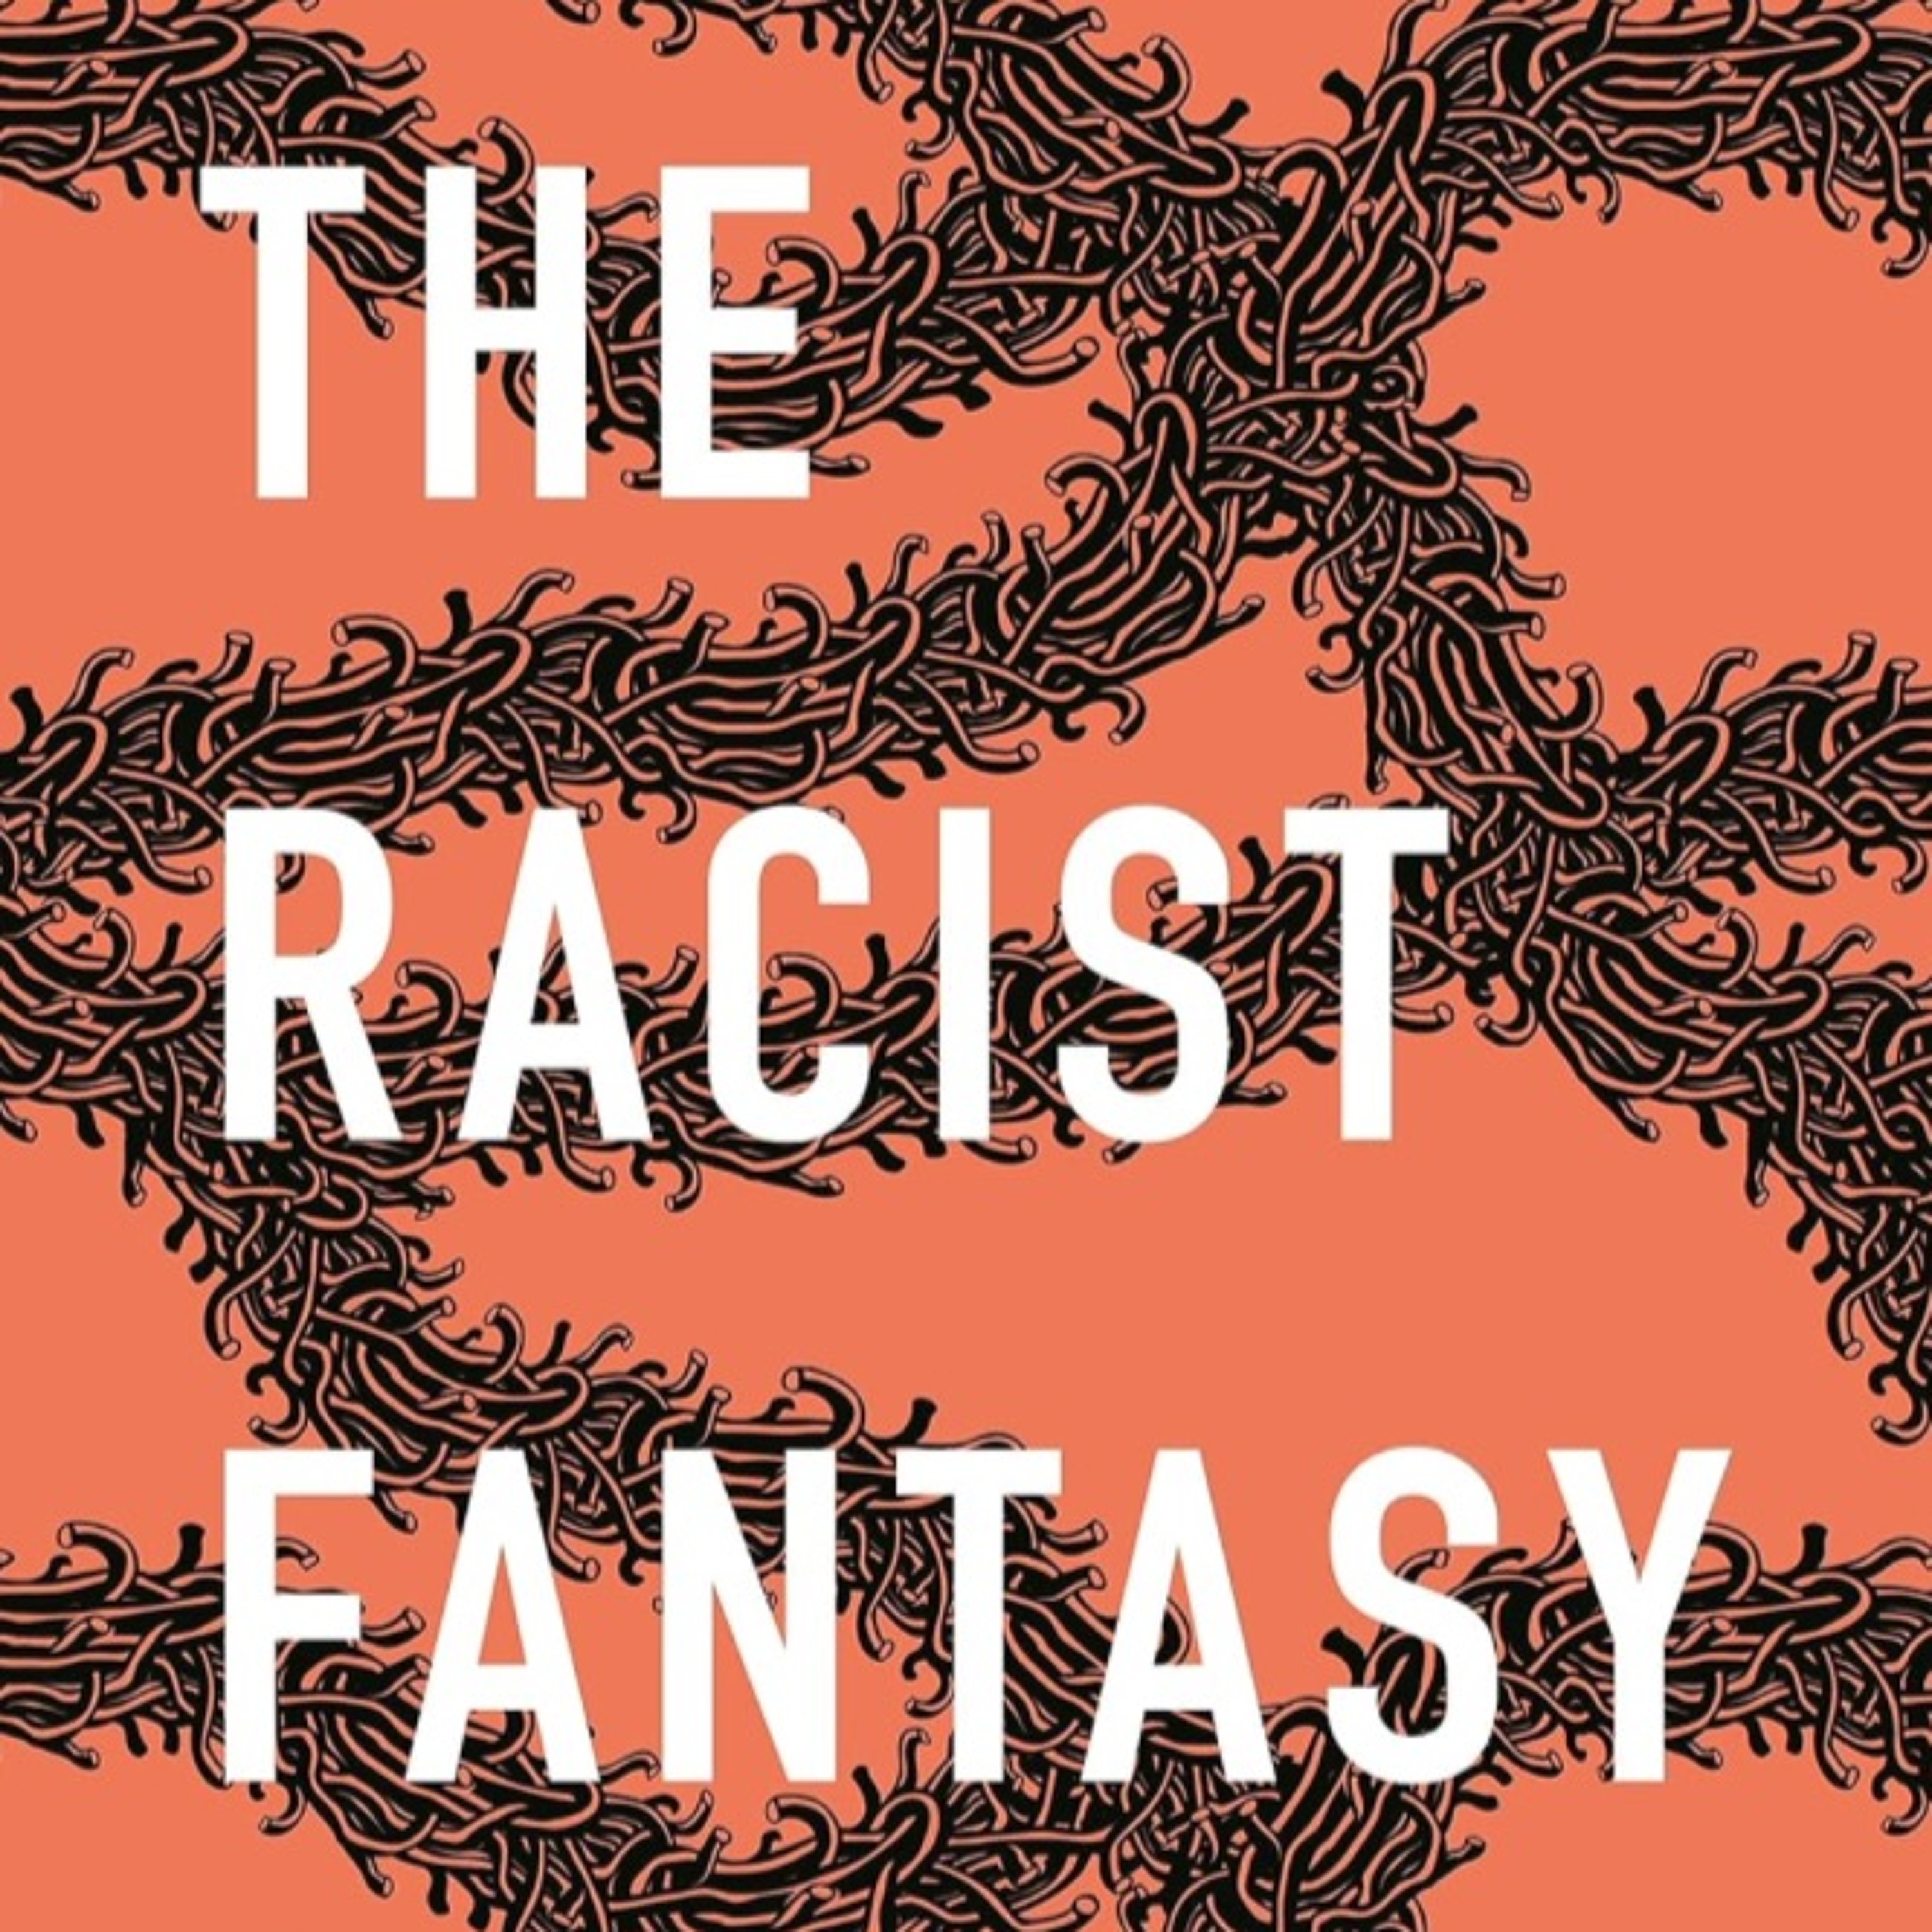 RU277: DR TODD MCGOWAN ON THE RACIST FANTASY: UNCONSCIOUS ROOTS OF HATRED